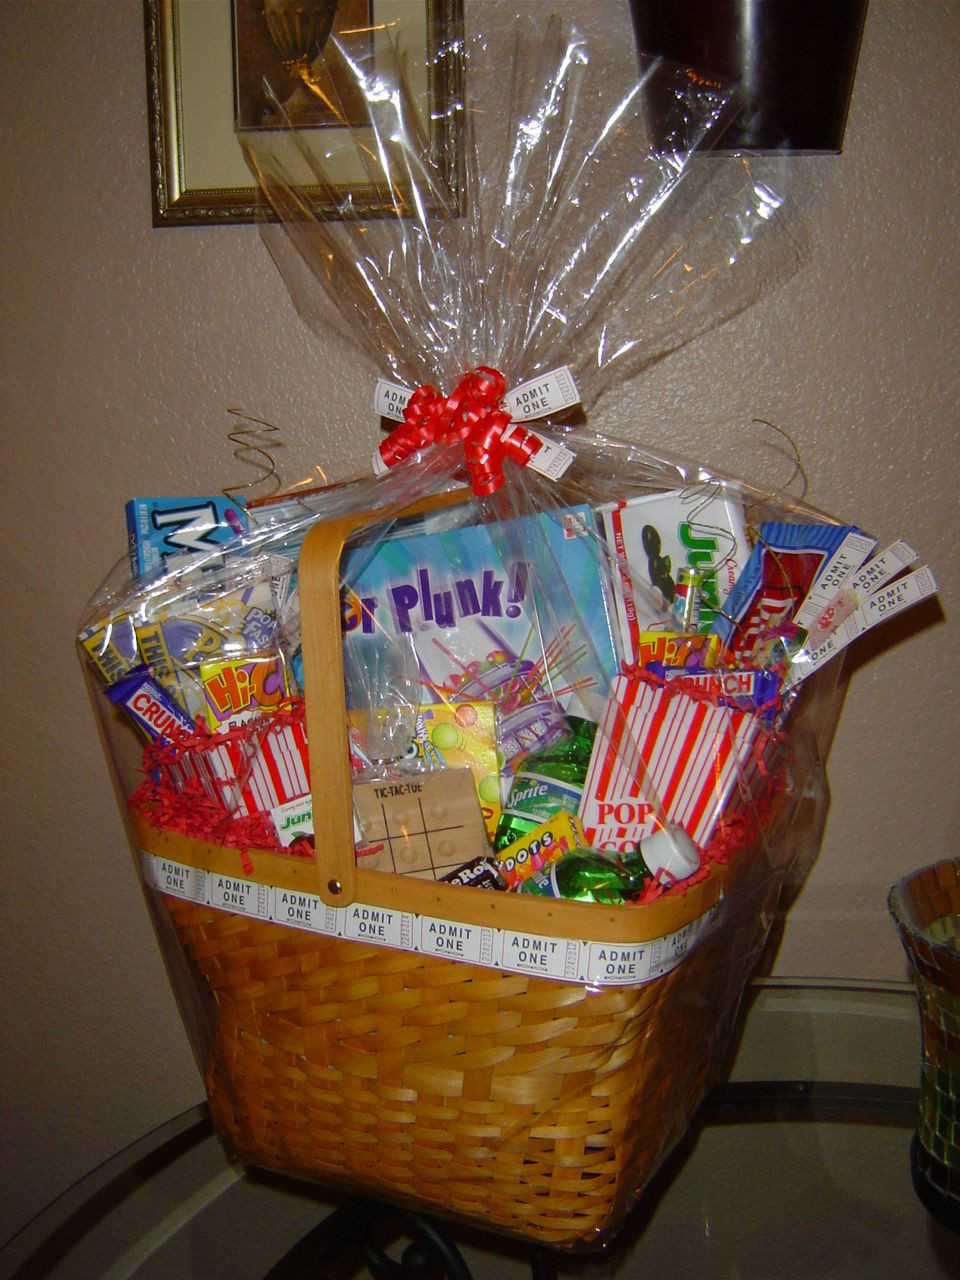 Family Fun Gift Basket Ideas
 Family Game & movie night t basket audjiefied